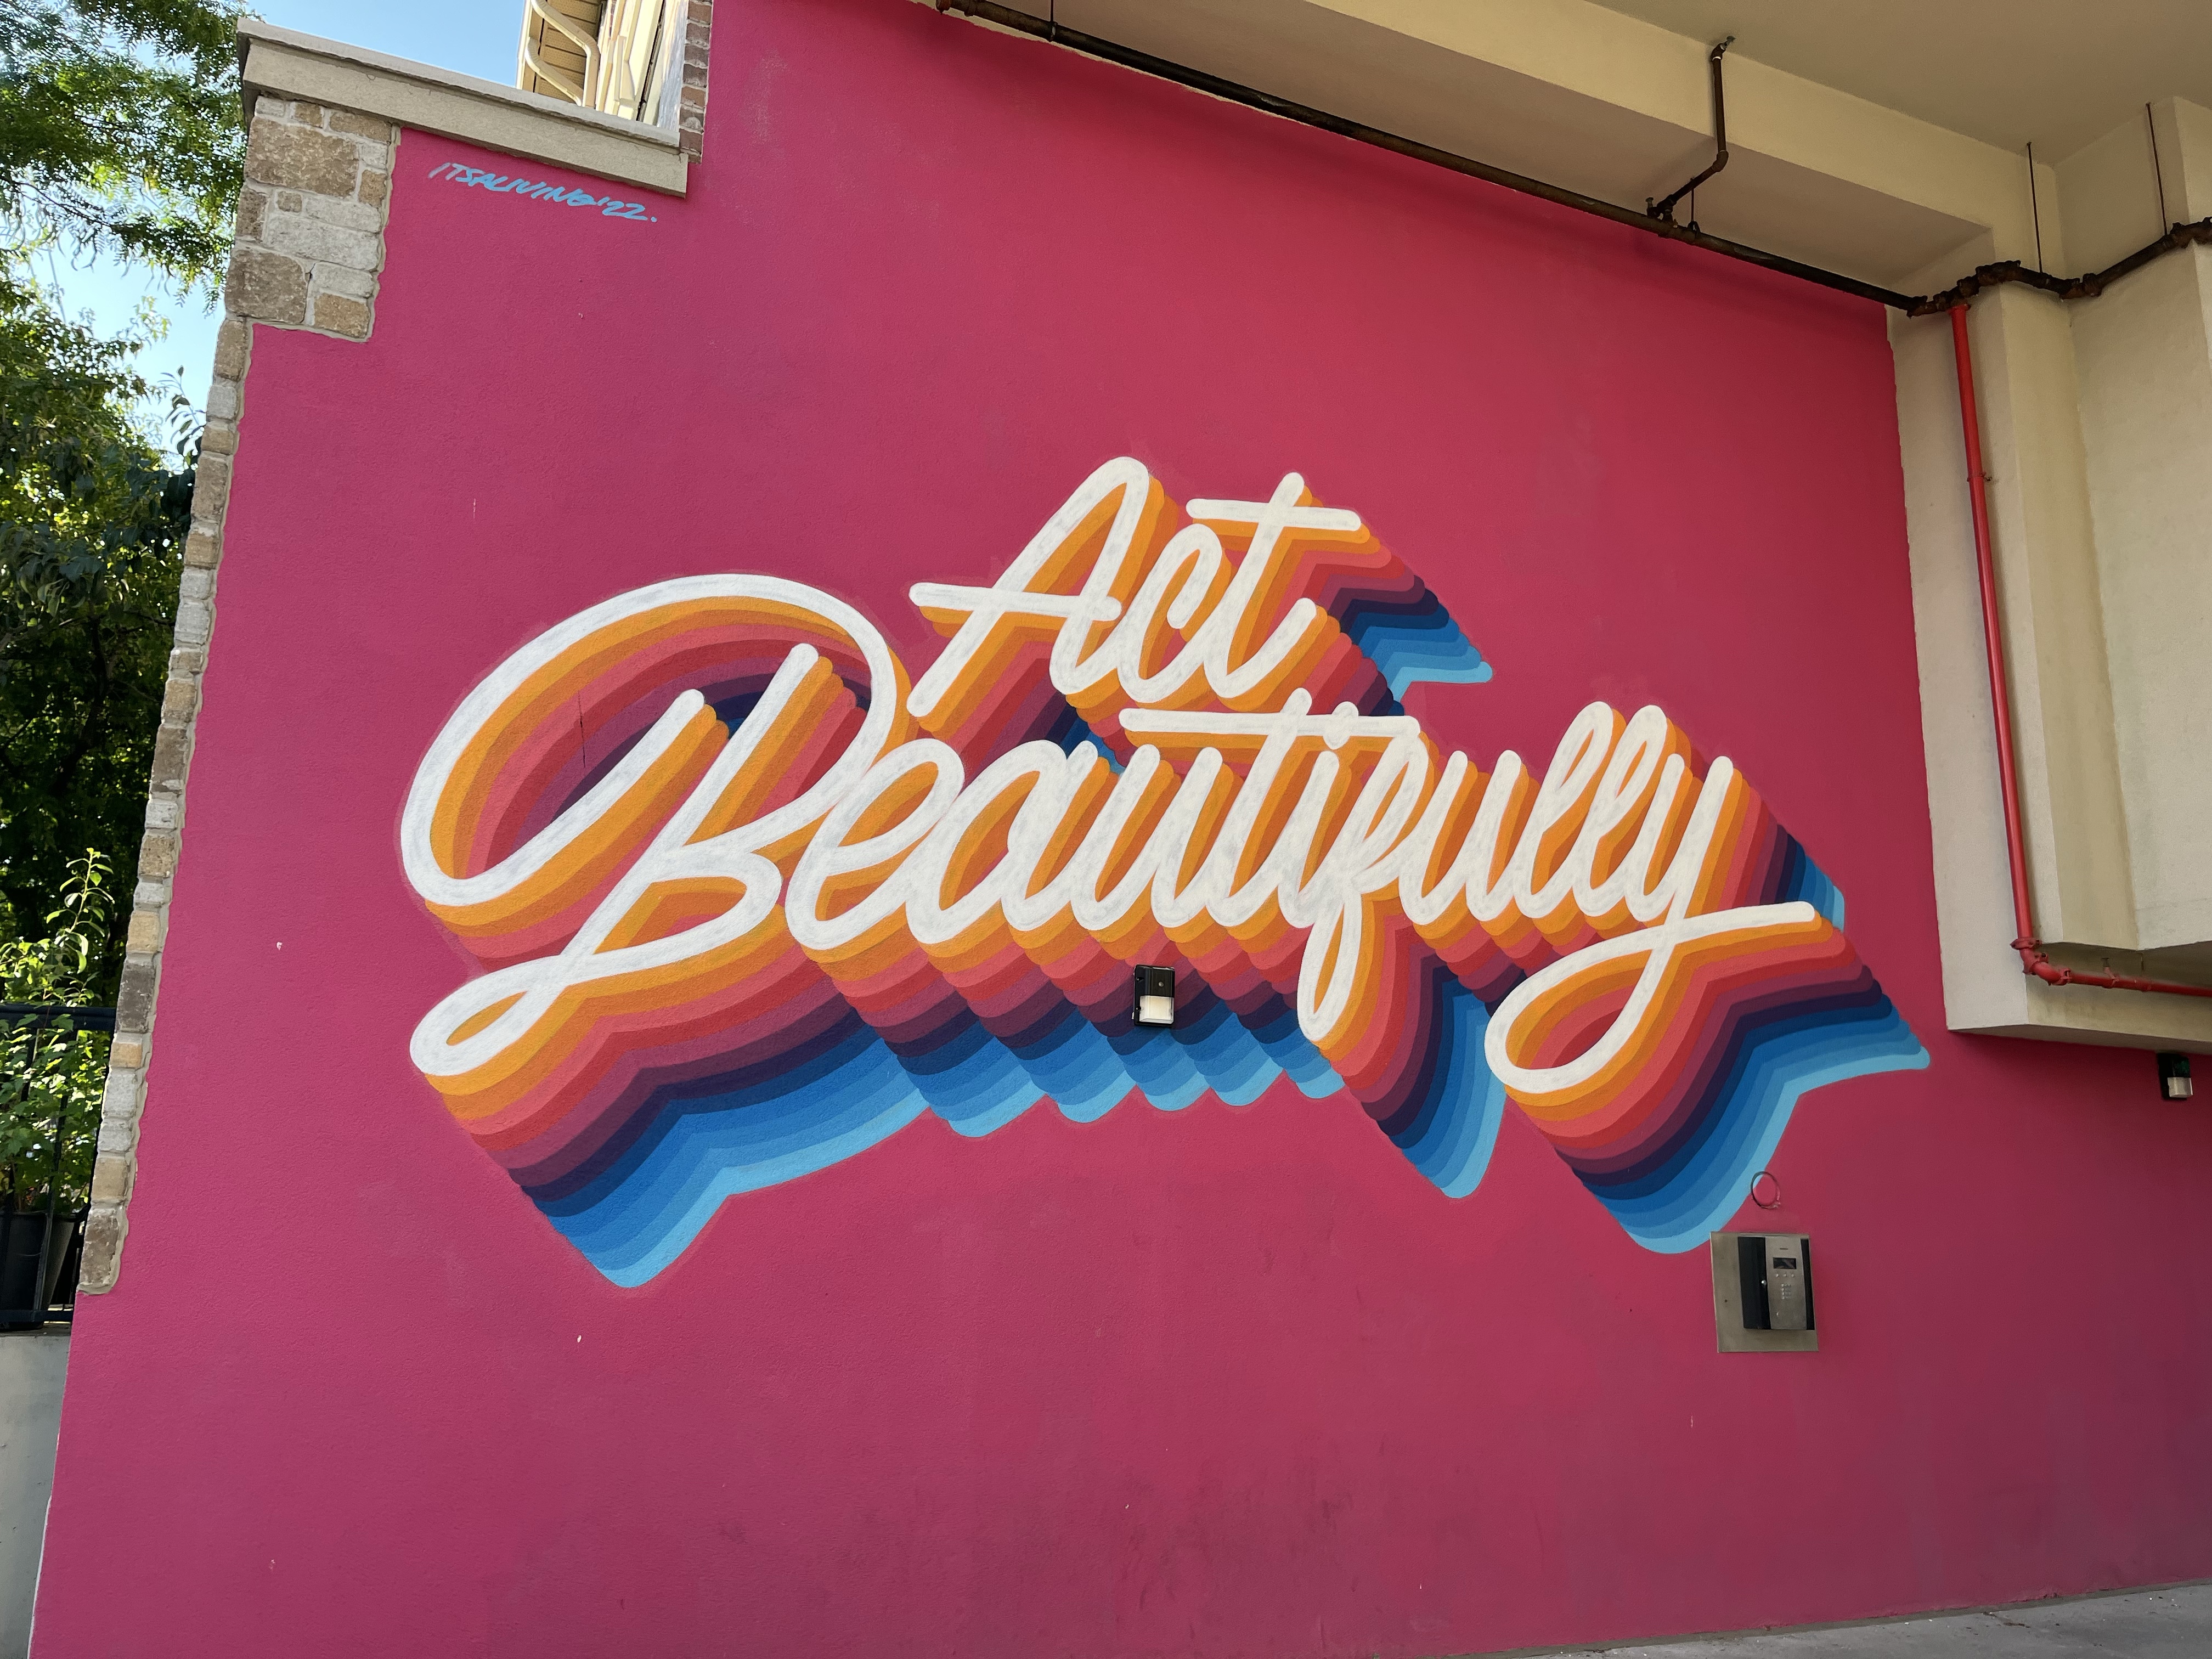 A mural with the words "Act Beautifully" on Ossington Avenue in Toronto